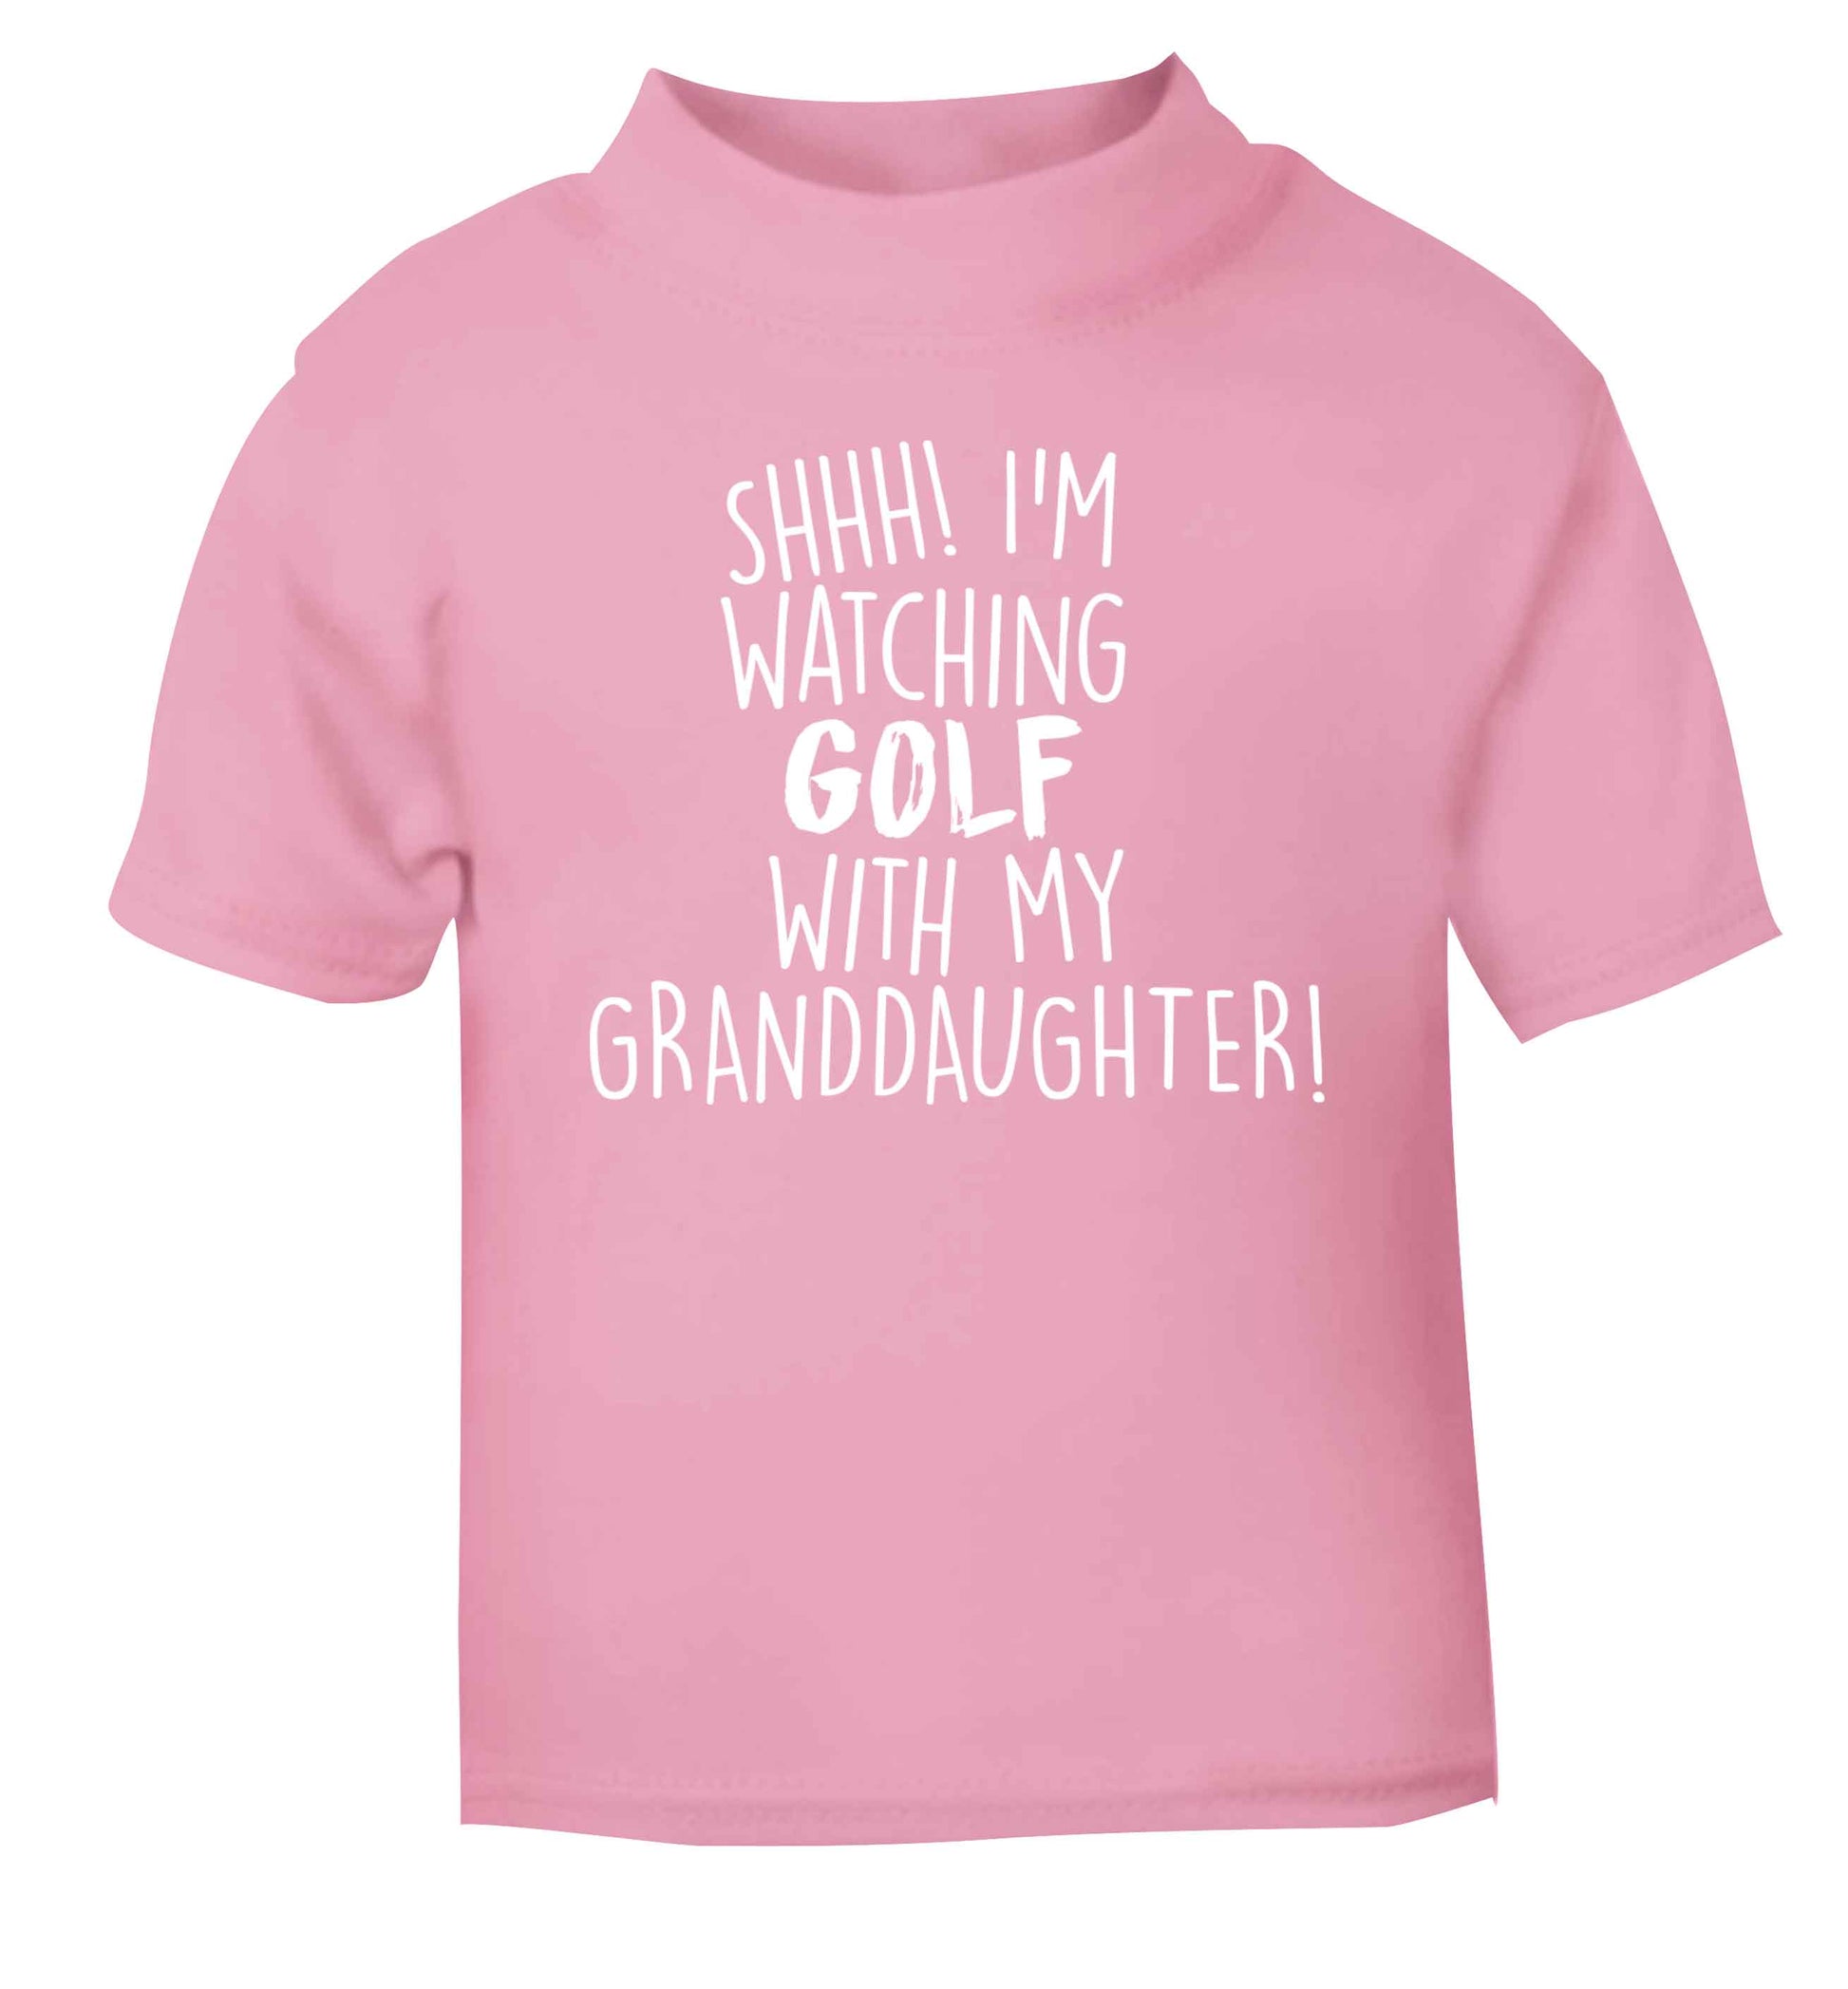 Shh I'm watching golf with my granddaughter light pink Baby Toddler Tshirt 2 Years